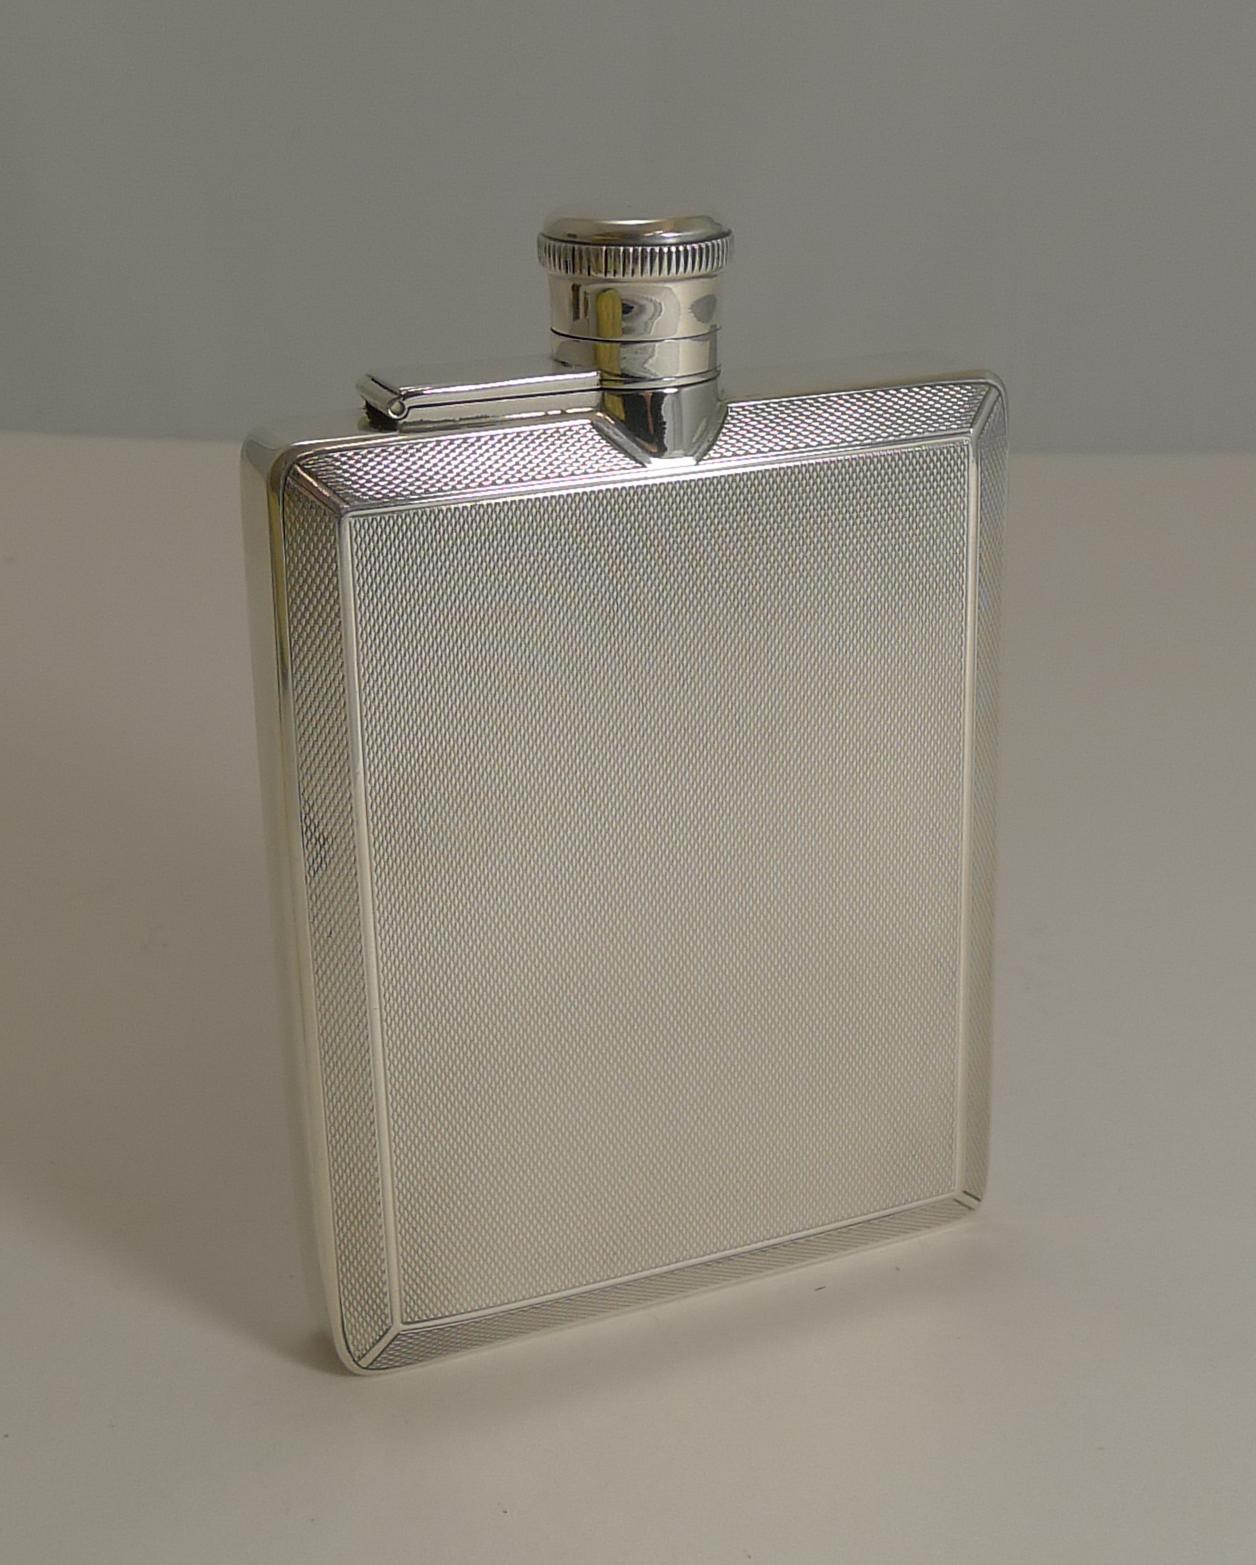 A very striking and smart sterling silver hip flask with an all-over engine-turned decoration to both the back and front.

The hinged lid requires a twist and lift action and reveals the cork within the lid to keep the precious contents.

The